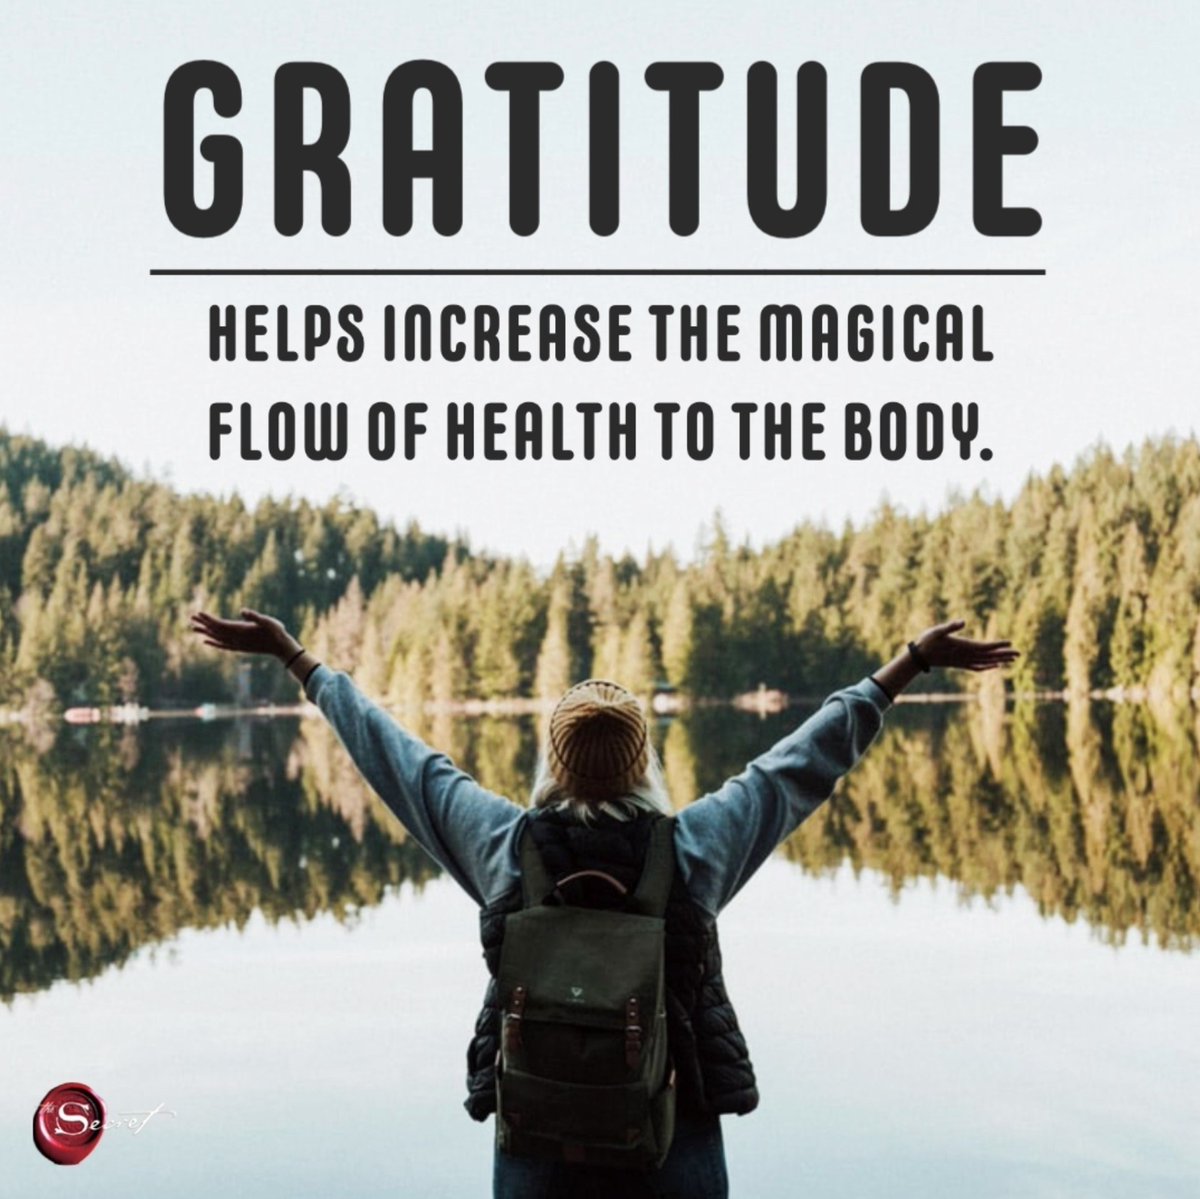 It can be very difficult to access feelings of gratitude when sick or in pain, but even the smallest bit of gratitude helps increase the magical flow of health to the body.